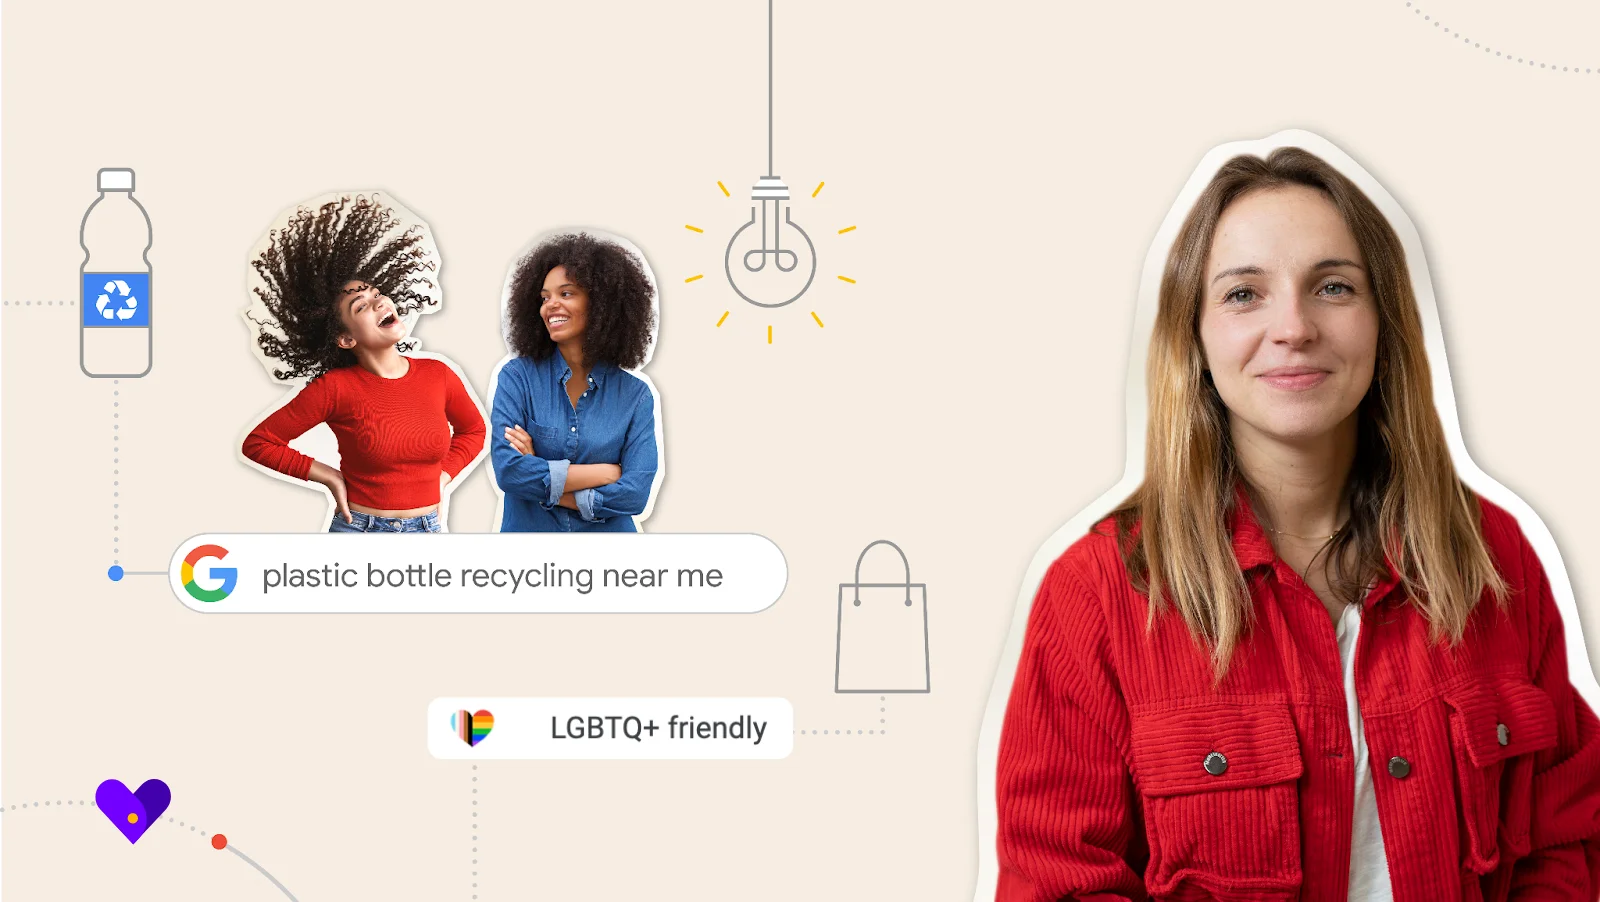 photos of three women accompanied by text boxes reading "LGBTQ+ friendly" and "plastic bottle recycling near me"